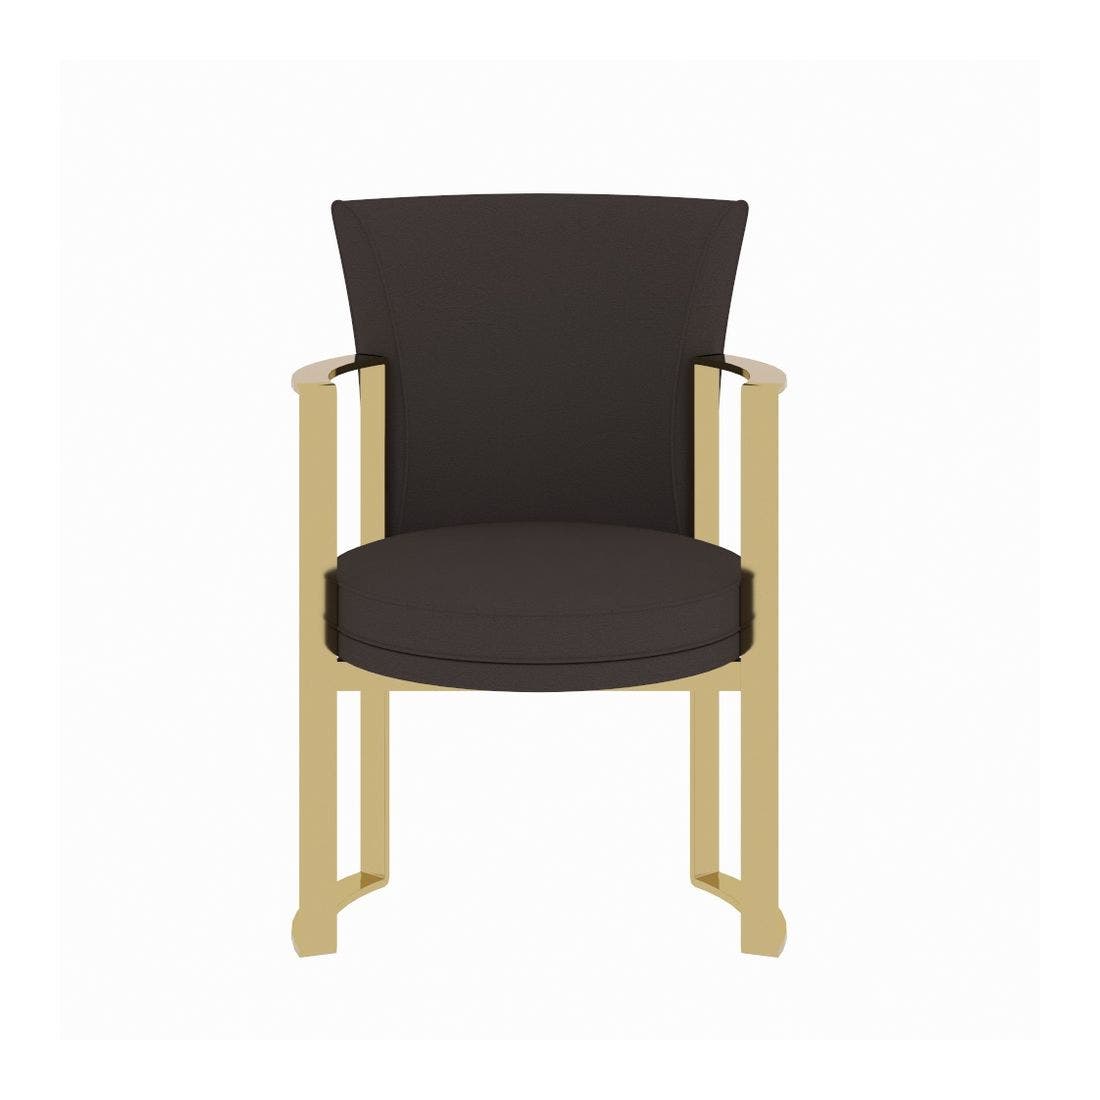 19119953-wonny-furniture-dining-room-chairs-01